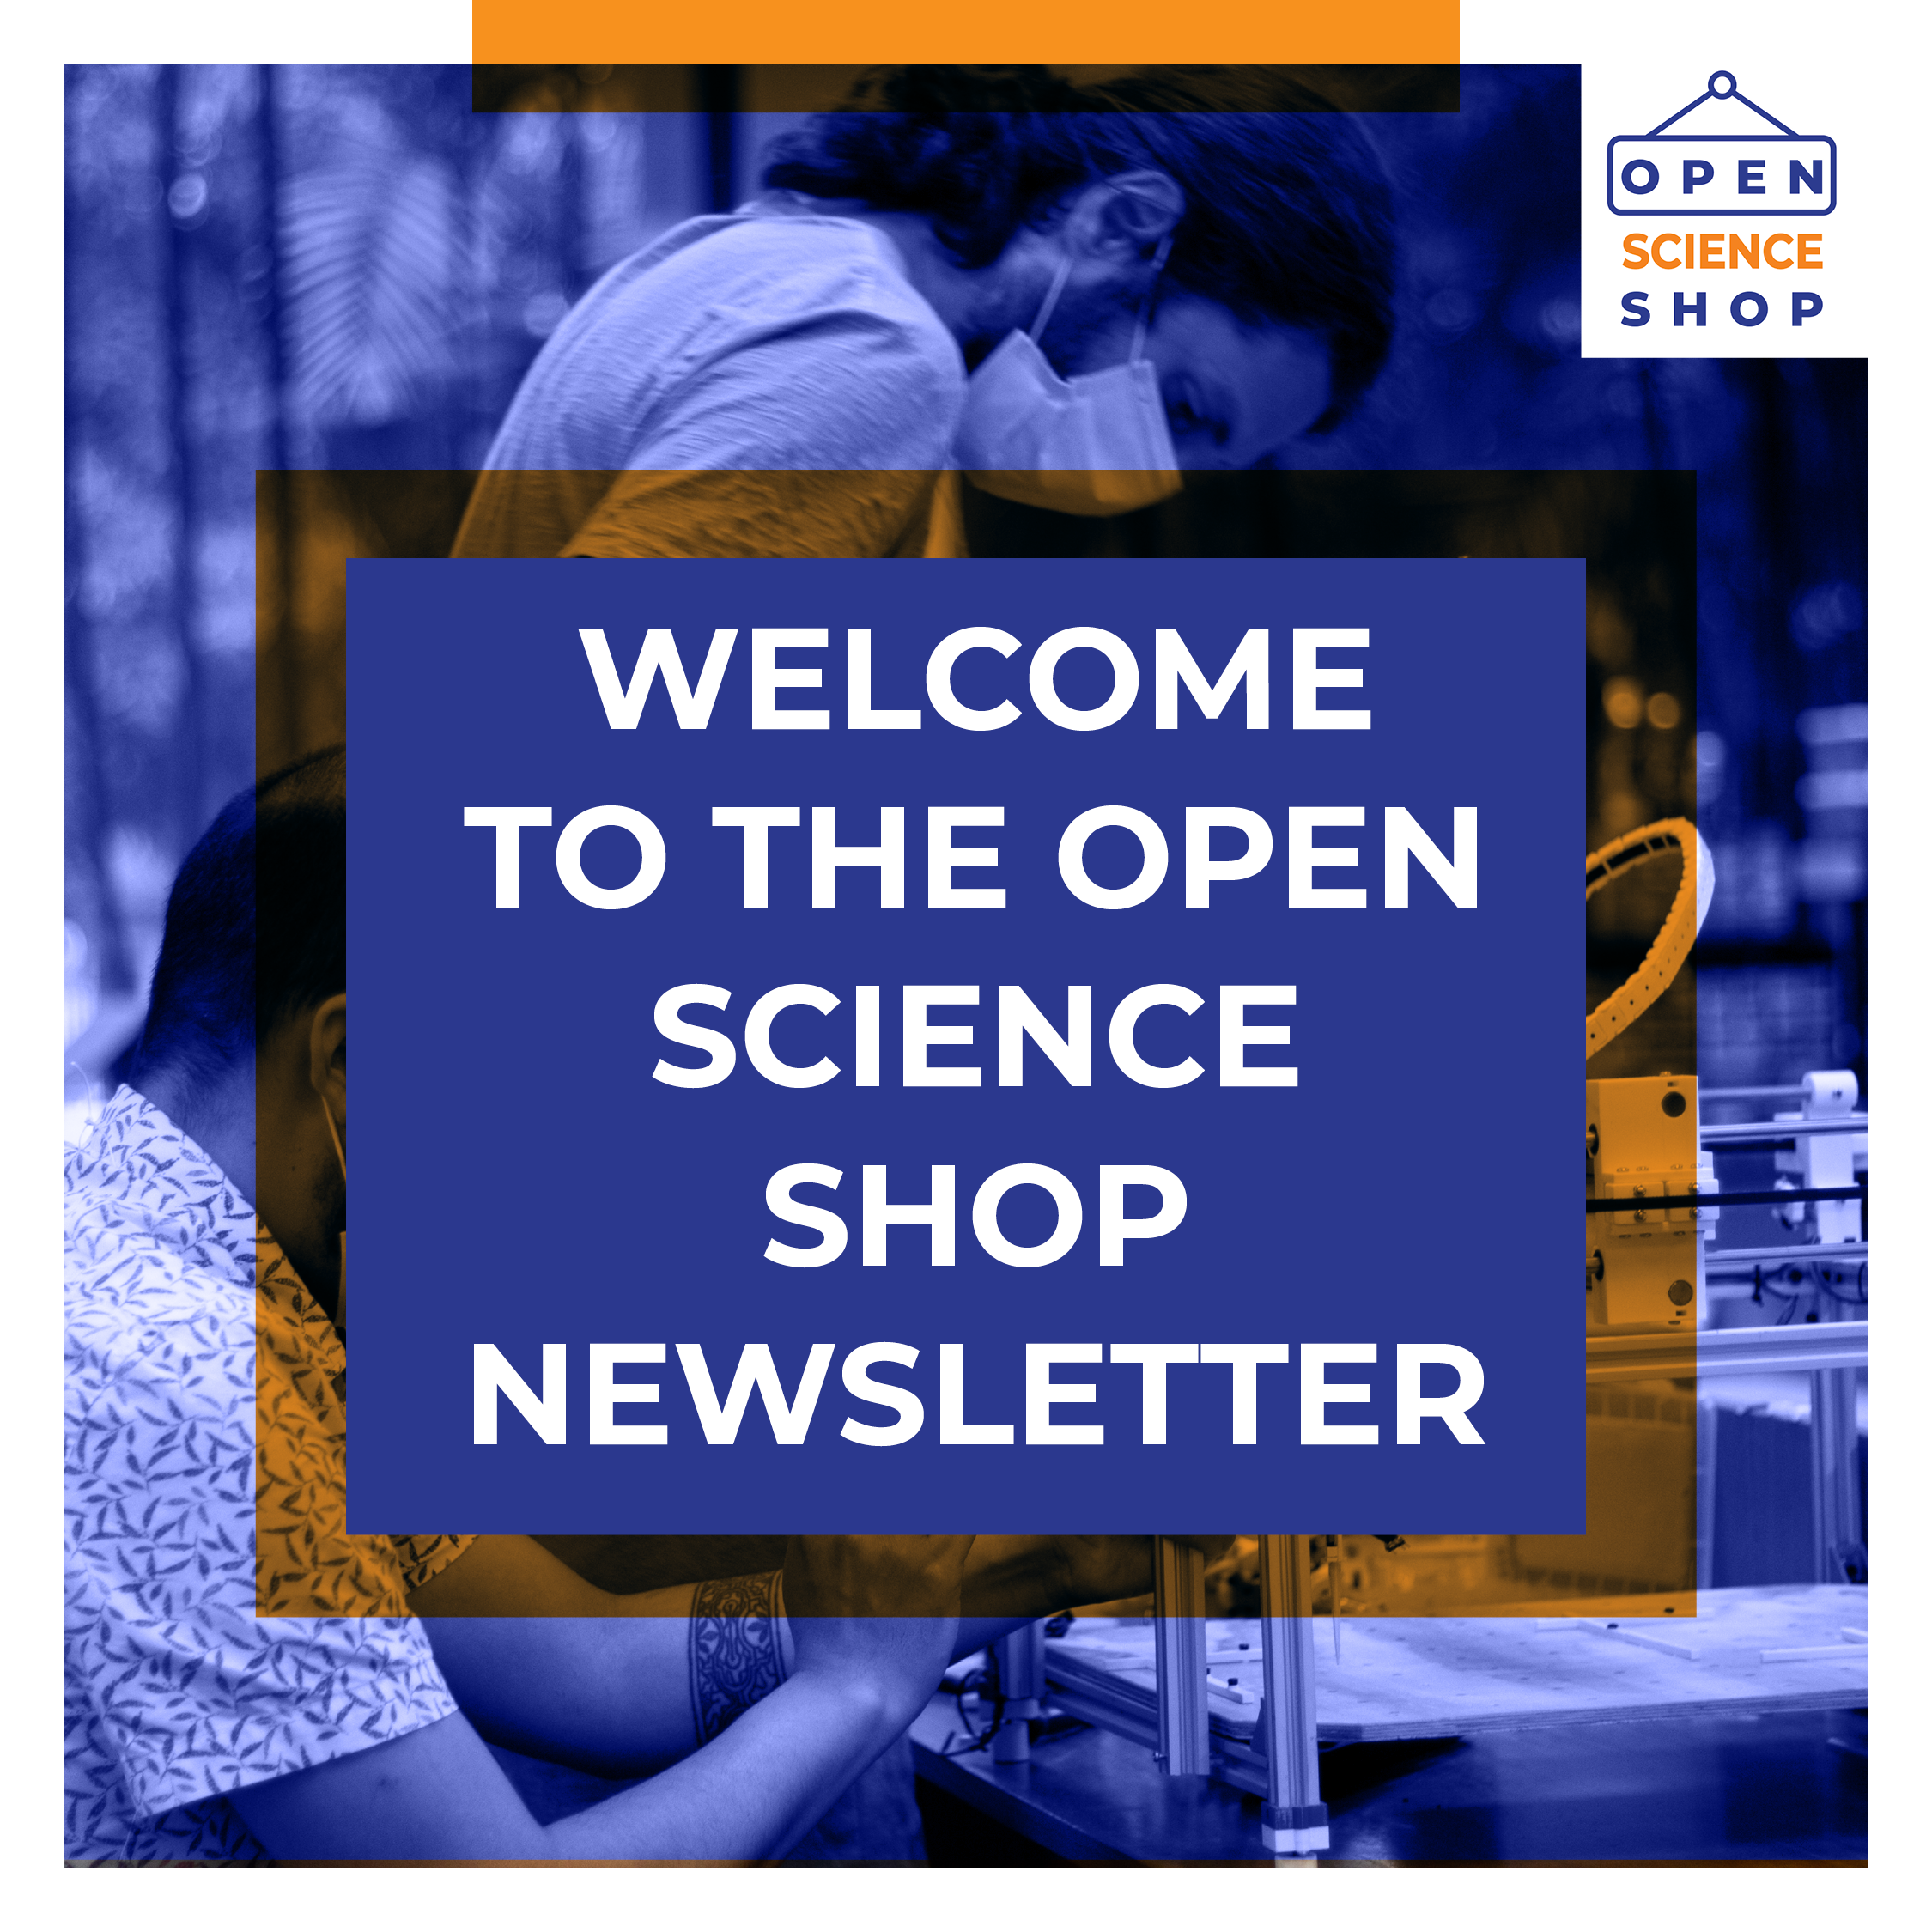 Welcome to the Open Science Shop Newsletter!